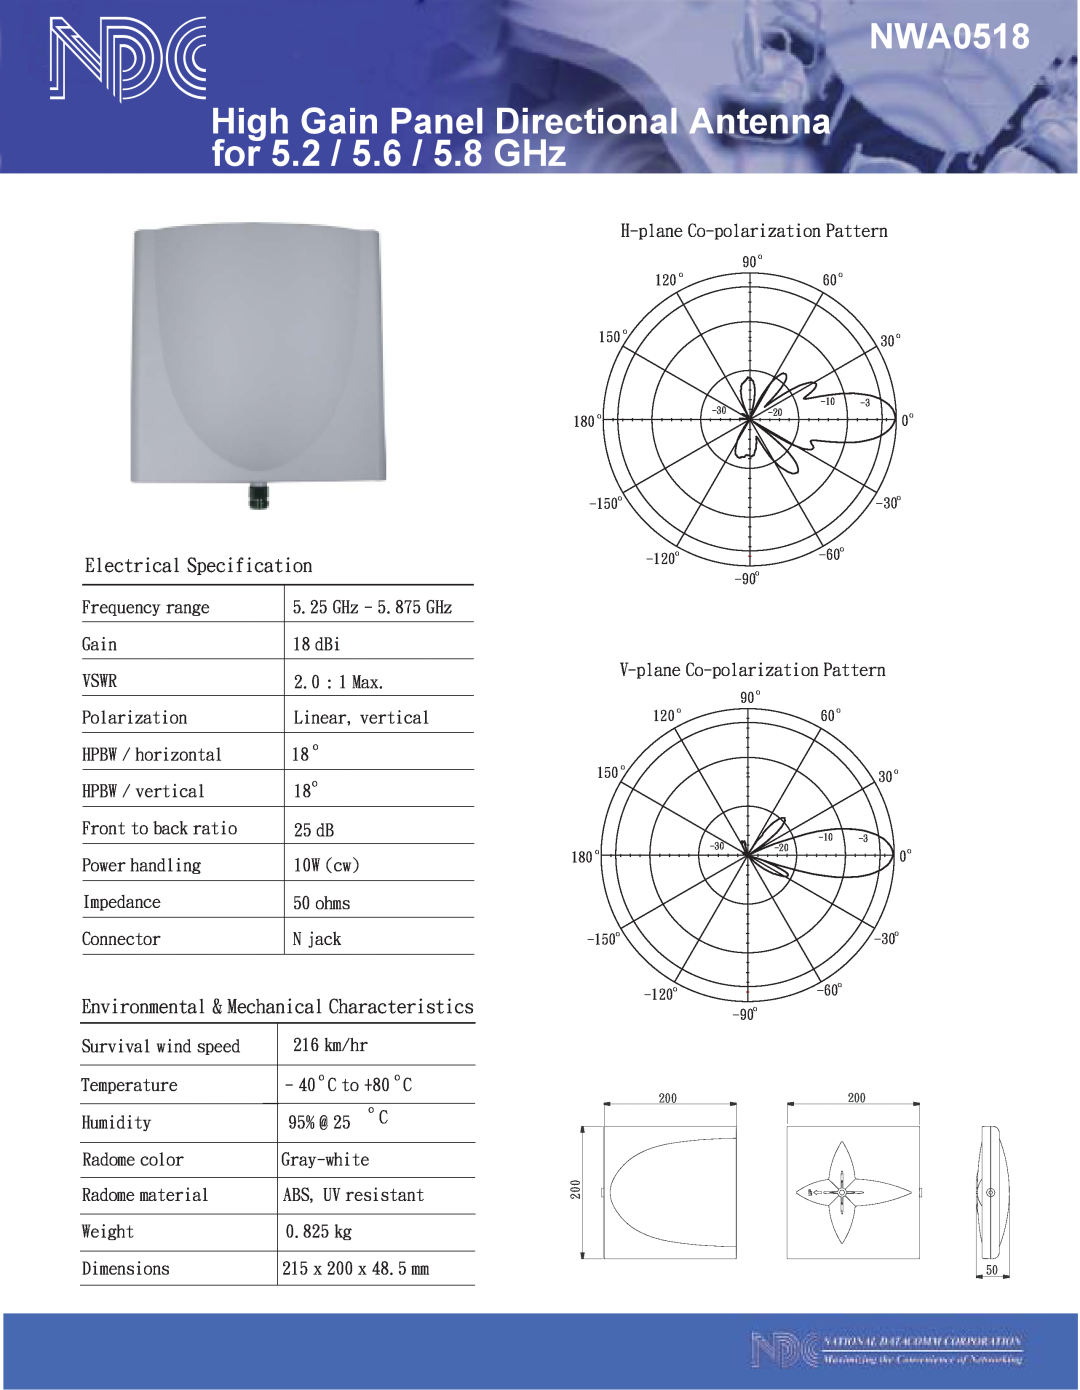 NDC comm NWA0518 dimensions Electrical Specification, Environmental & Mechanical Characteristics 